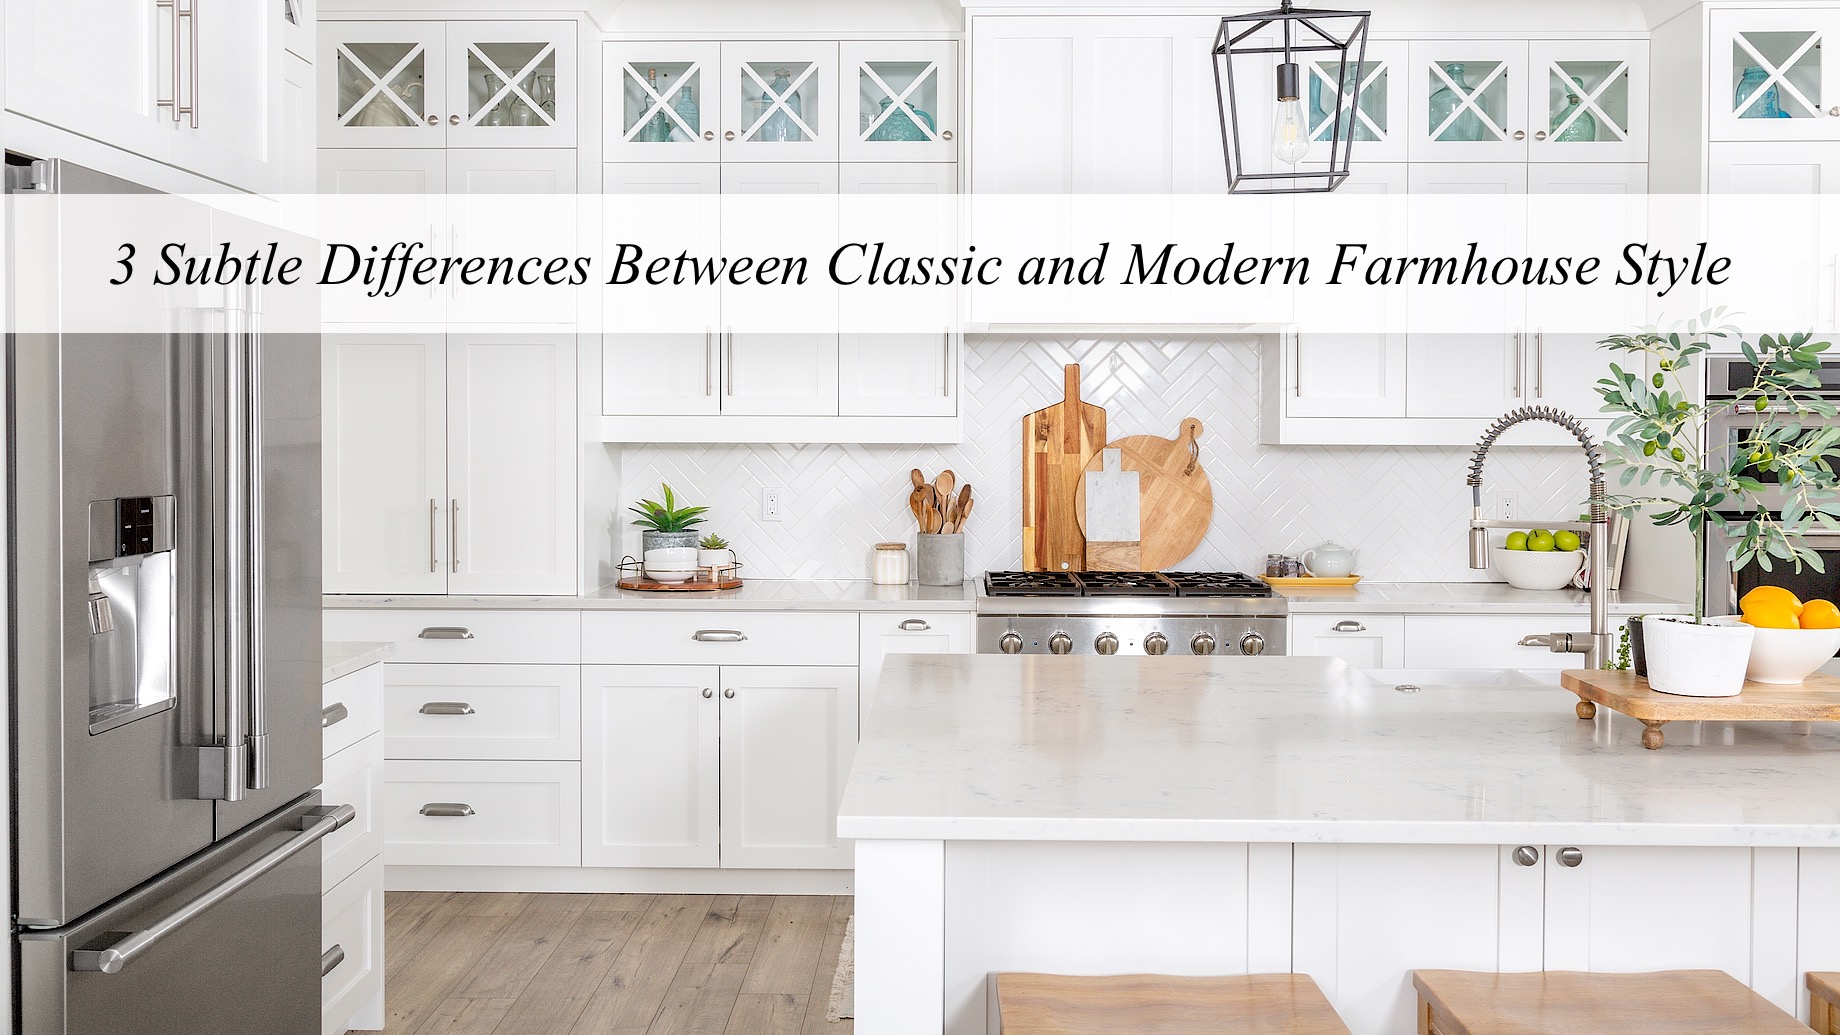 3 Subtle Differences Between Classic and Modern Farmhouse Style